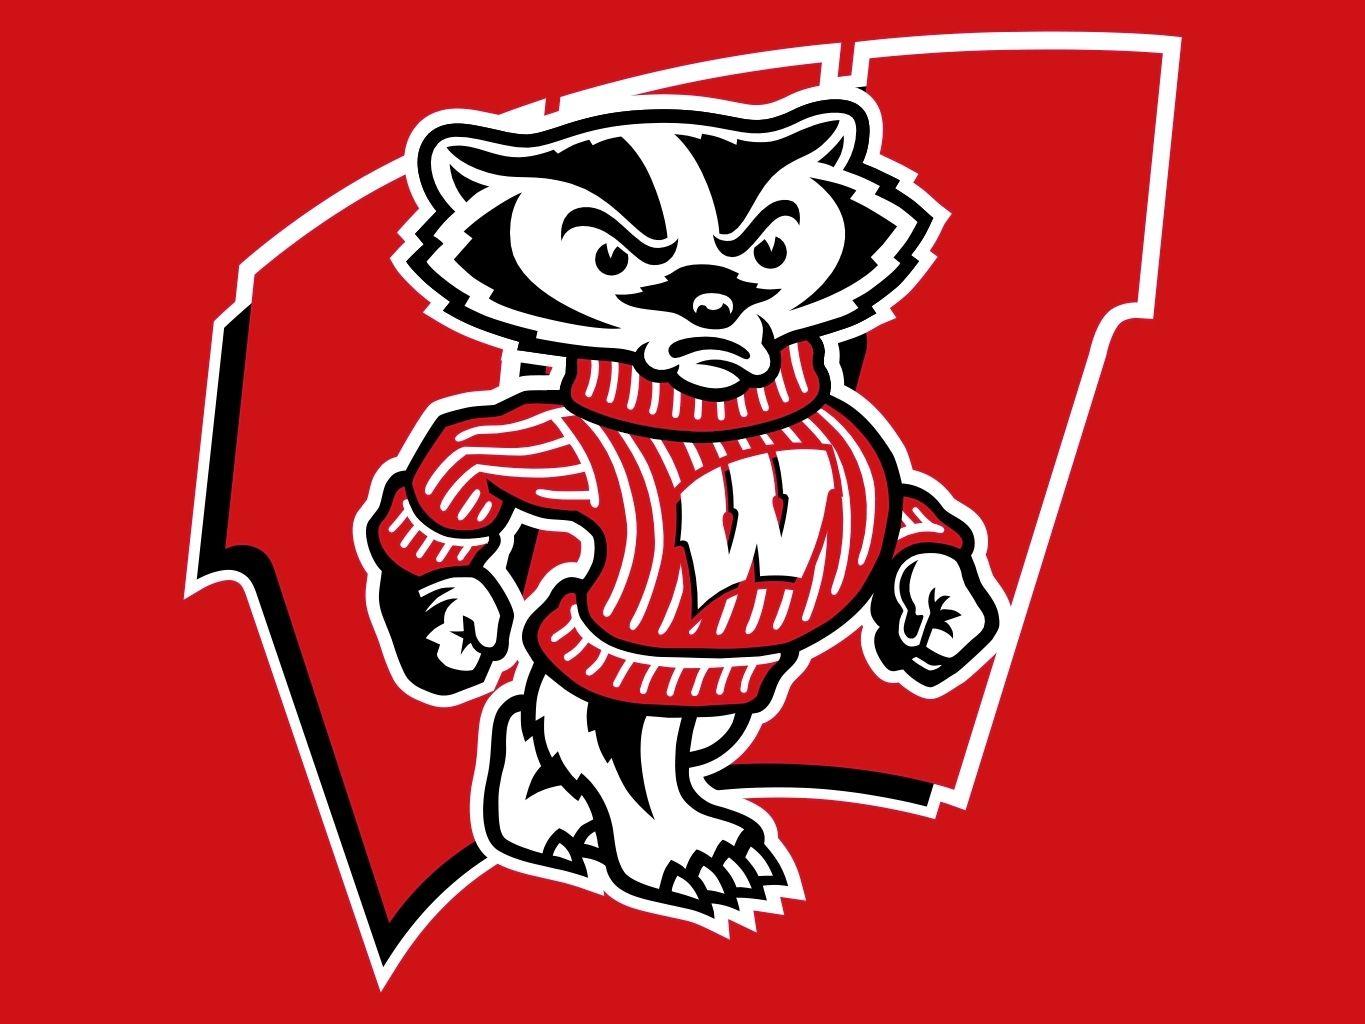 Wisconson Logo - Free Wisconsin Football Cliparts, Download Free Clip Art, Free Clip ...